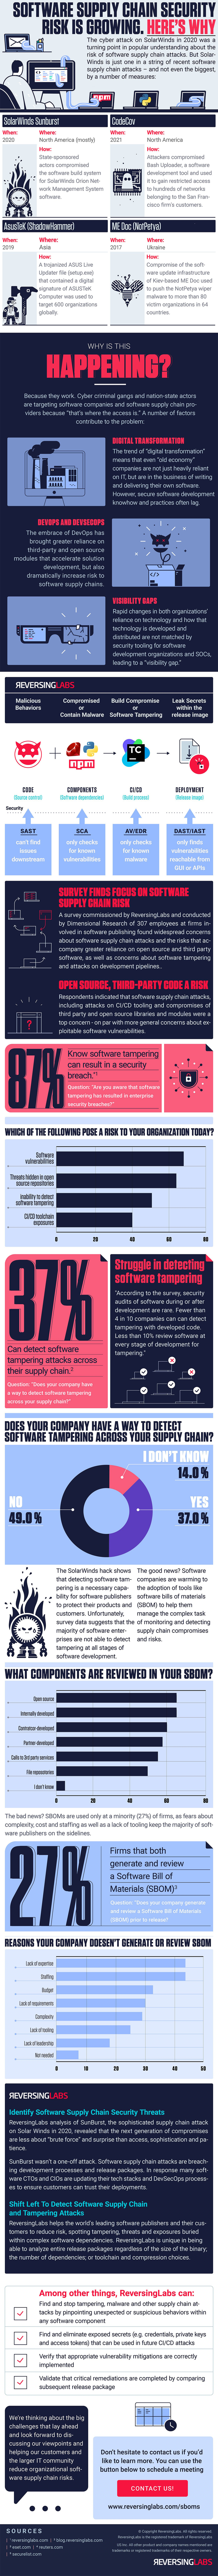 Software Supply Chain Security Risk is Growing